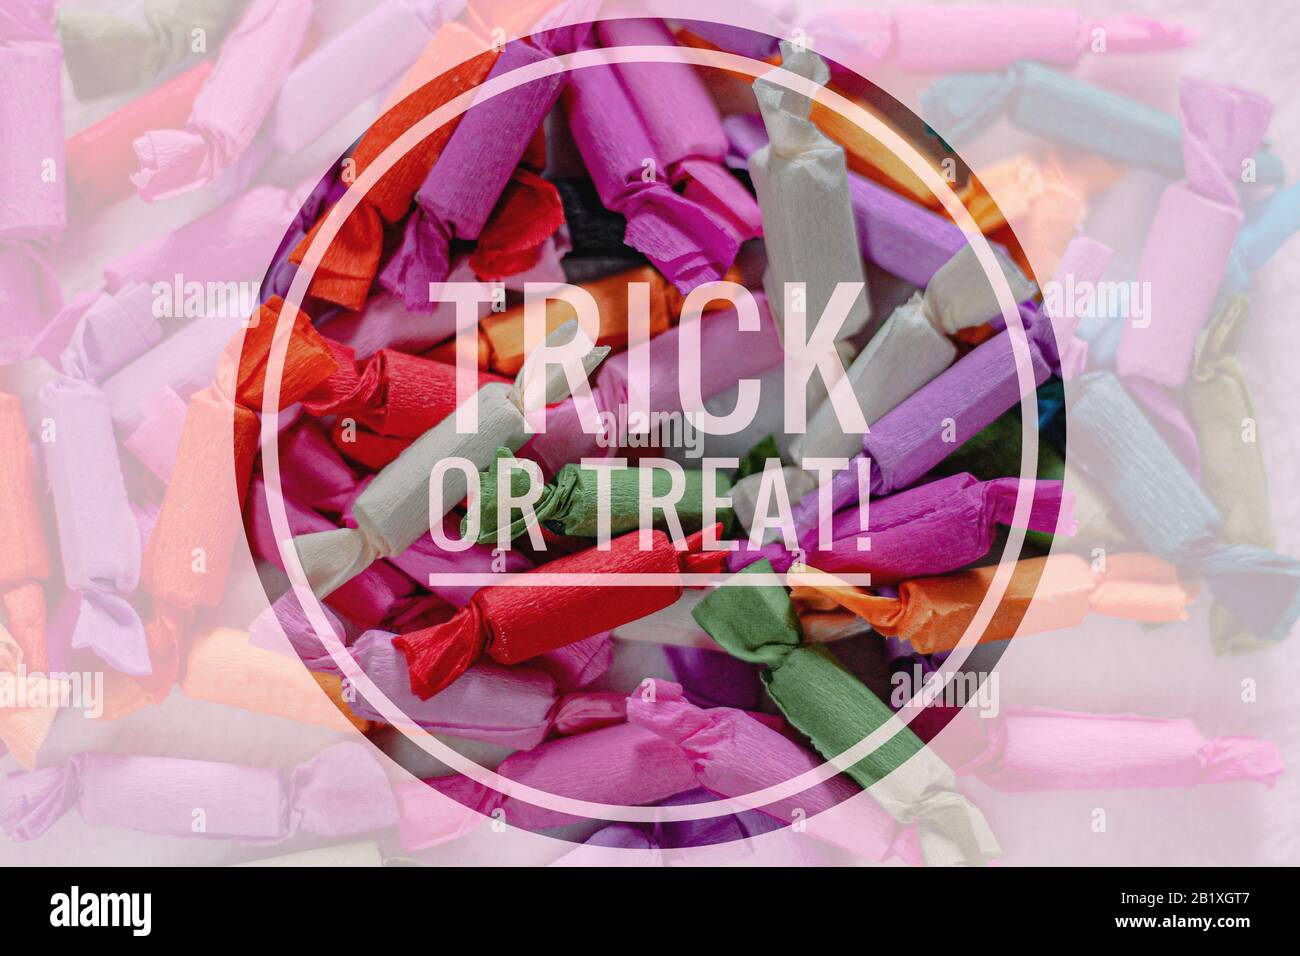 Trick or Treat Halloween Typography Background against colorful wrapped candy treats Stock Photo